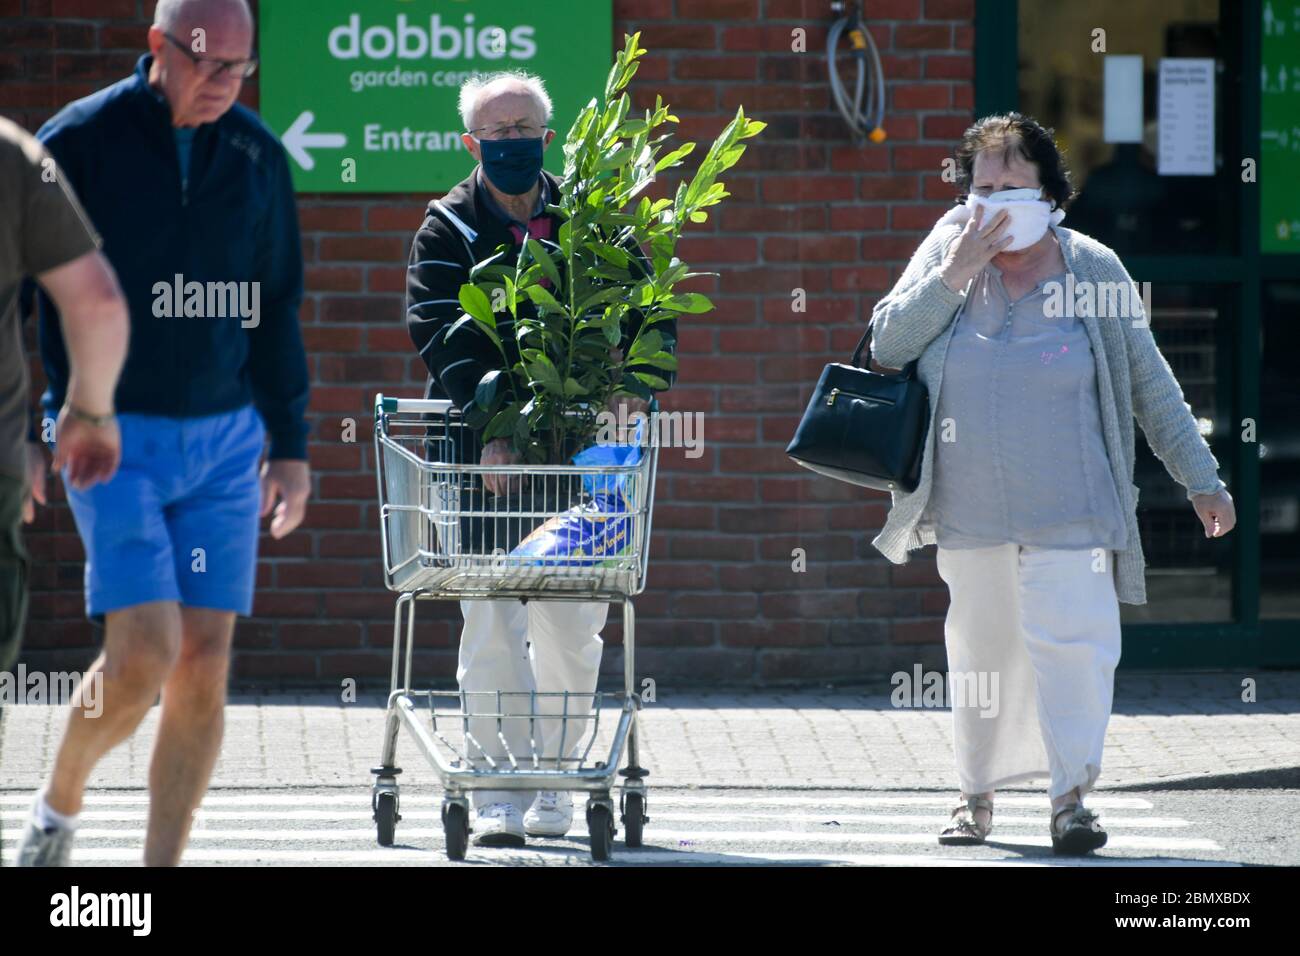 Swansea, UK. 11th May, 2020. A couple leave Dobbies Garden Centre in Swansea after the Welsh Government relaxed rules on the opening of centre's in Wales, with England following suit on Wednesday 13th May. Garden Centres and nurserys will be able to open with social distancing measures in place.   Credit: Robert Melen/Alamy Live News Stock Photo